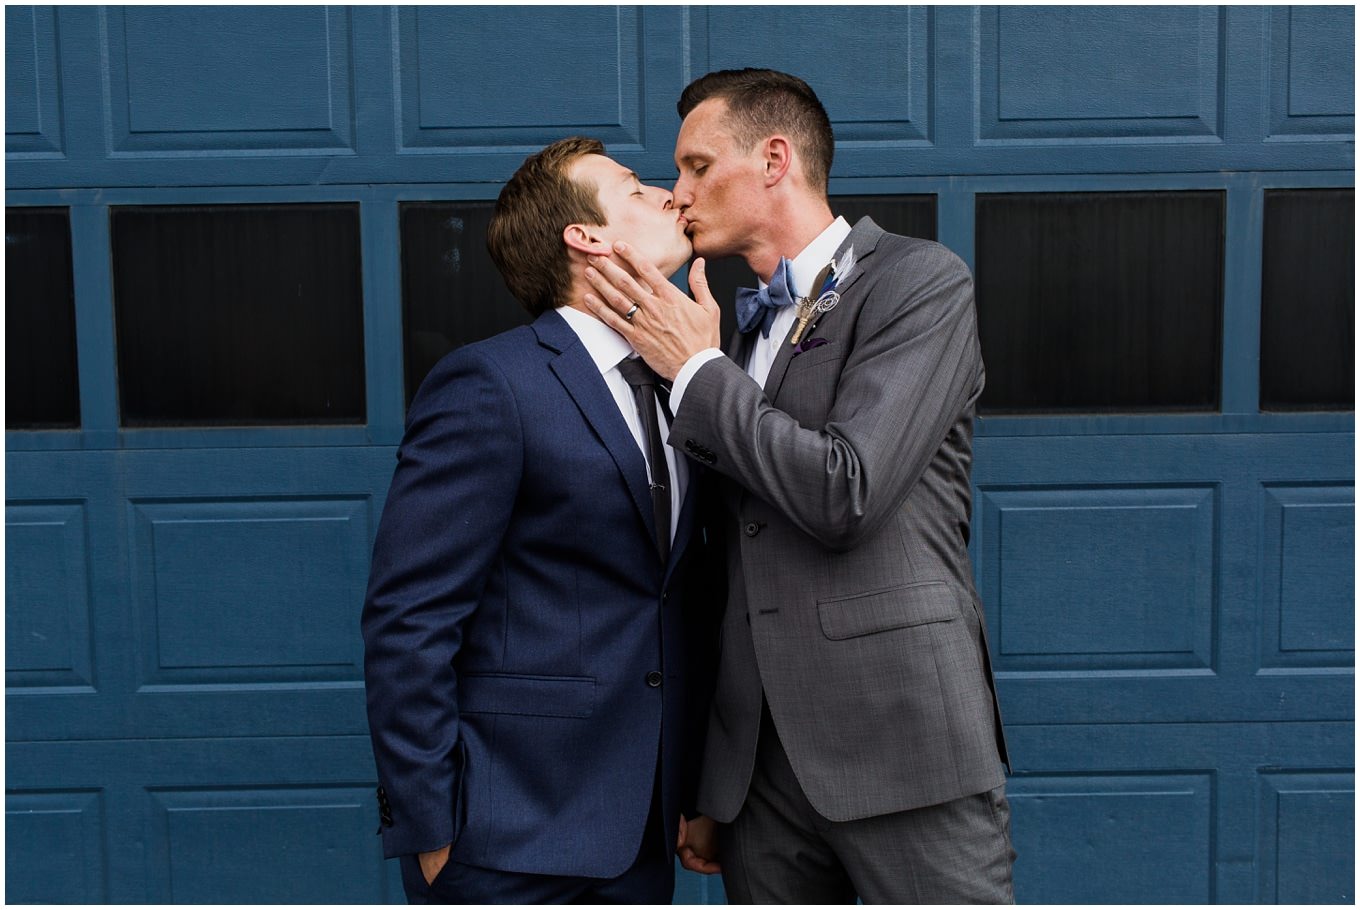 adam lowe photography, wedding, columbus, ohio, pride, gay, tom and terry, smith bros, dock 580, the loft, downtown, stylish, pursuit, ecoflora, groom and groom, grooms, 